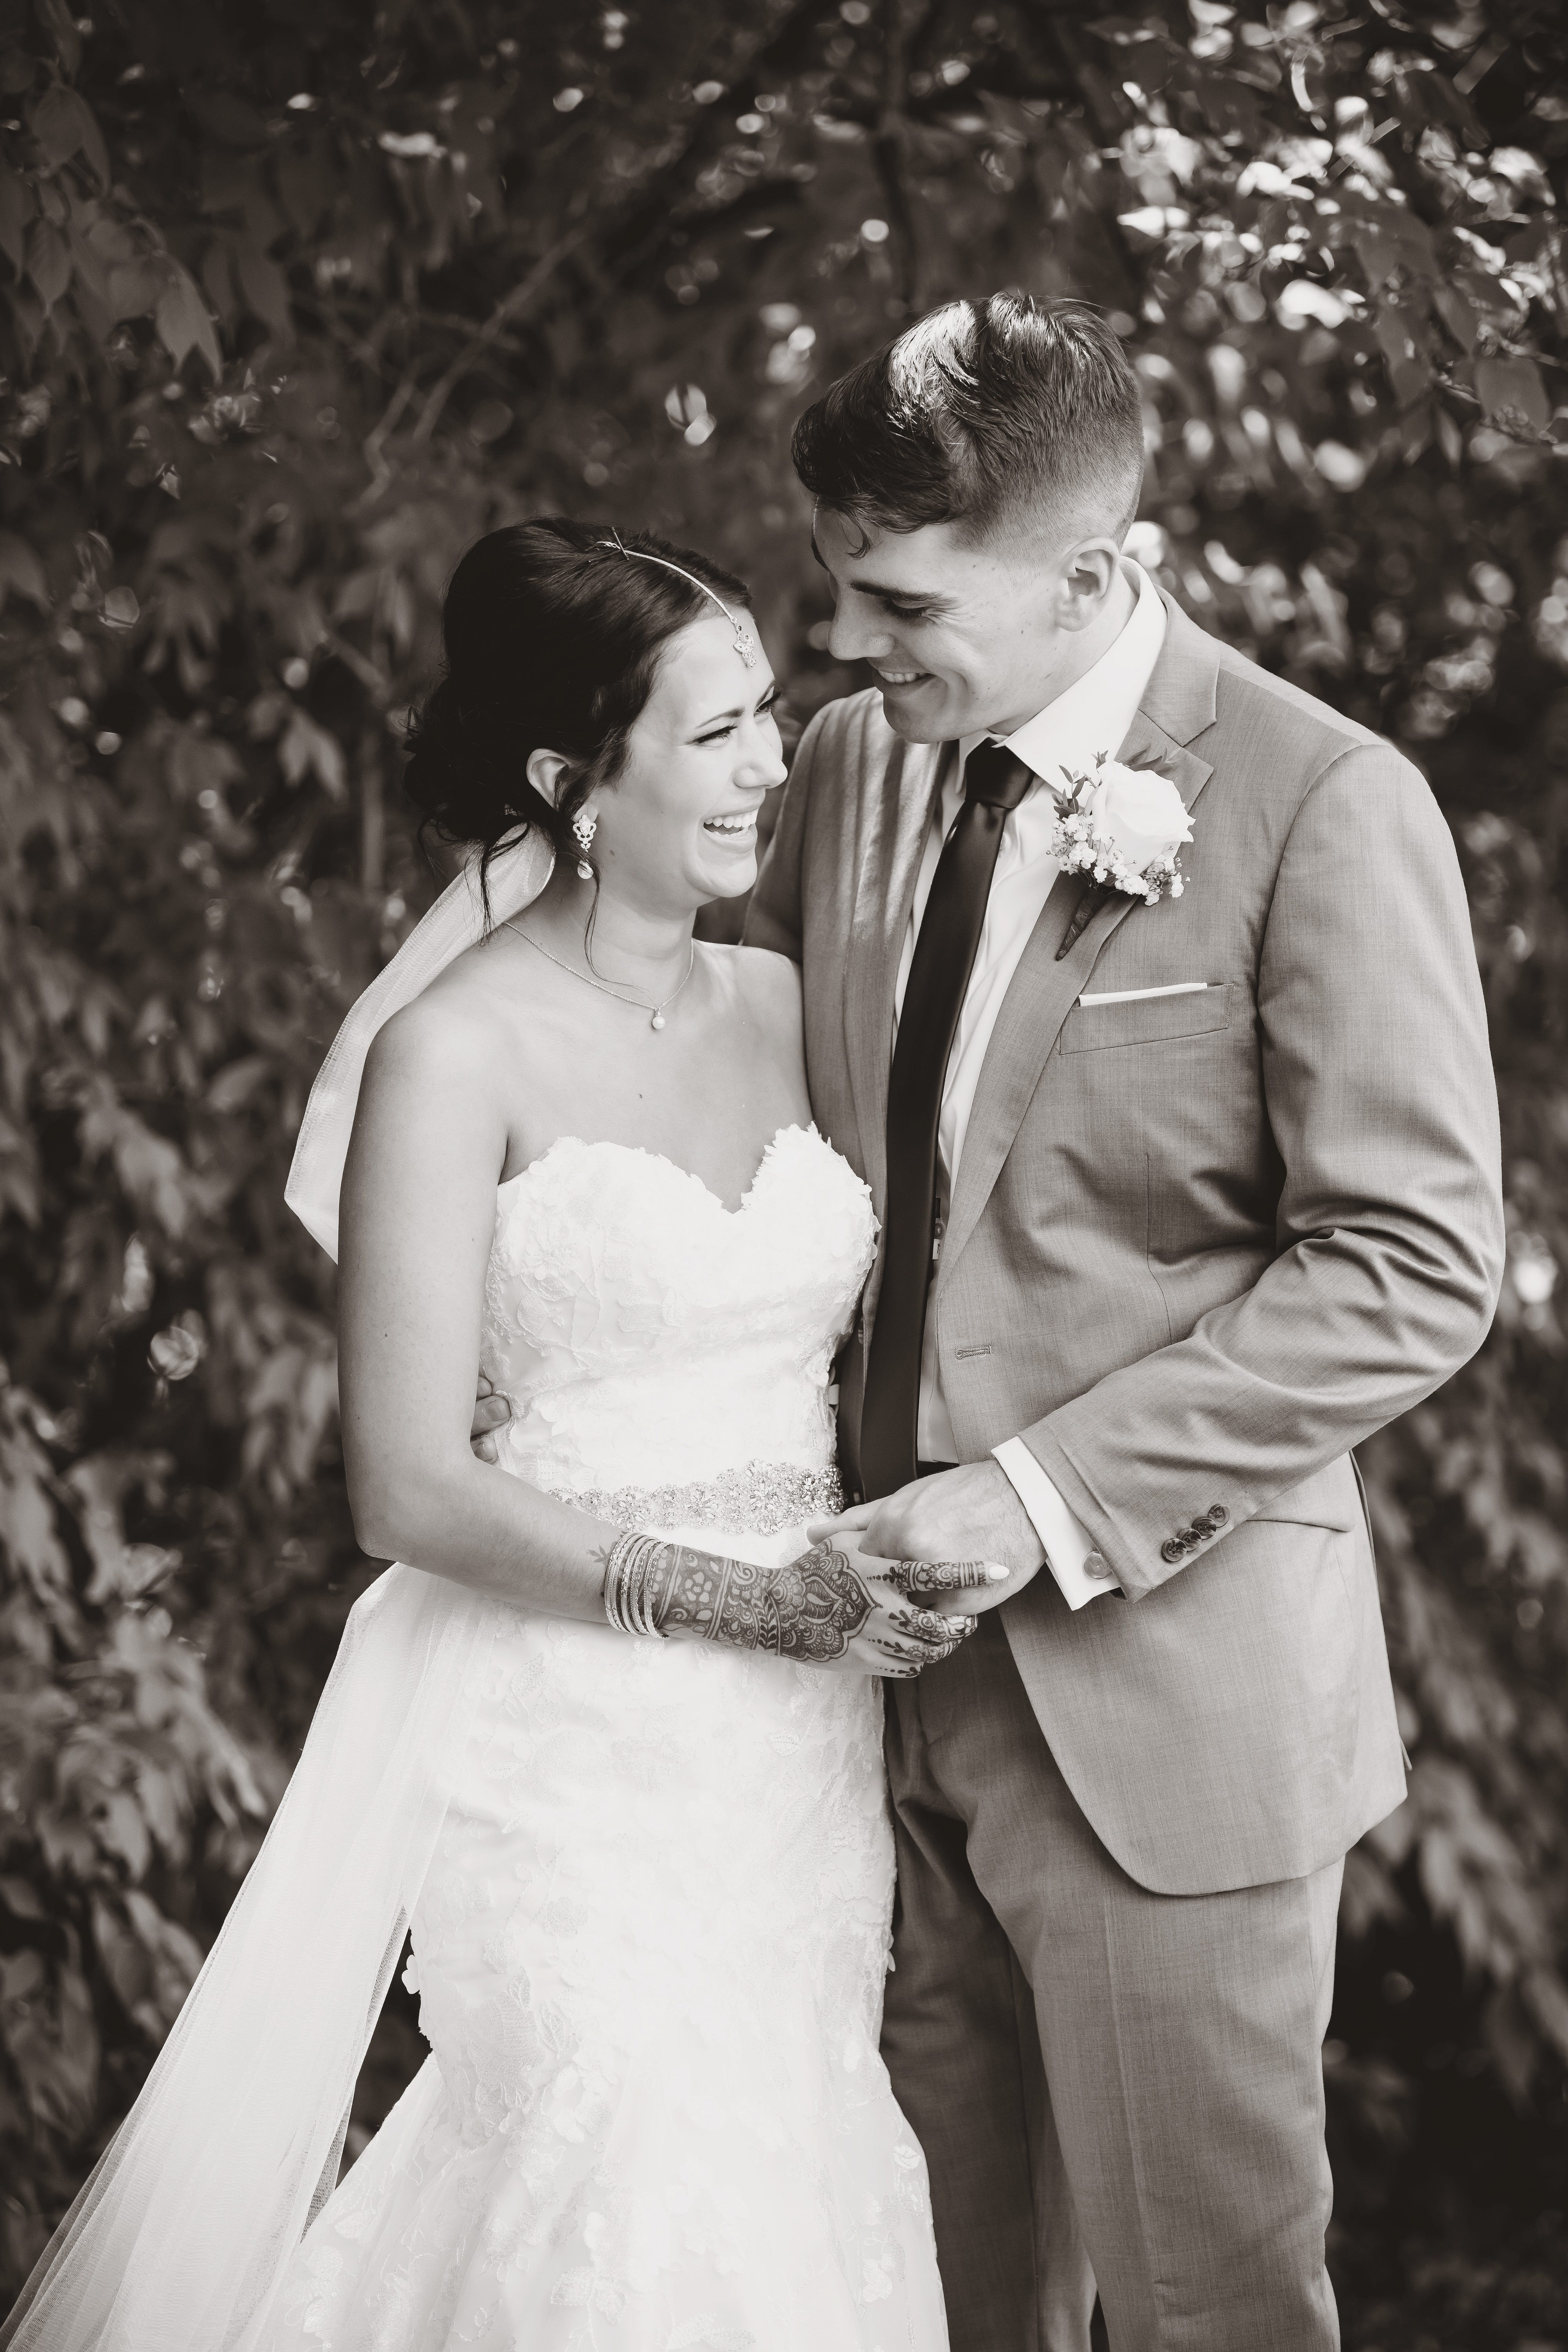 A timeless, black and white photograph for the newlyweds to treasure forever